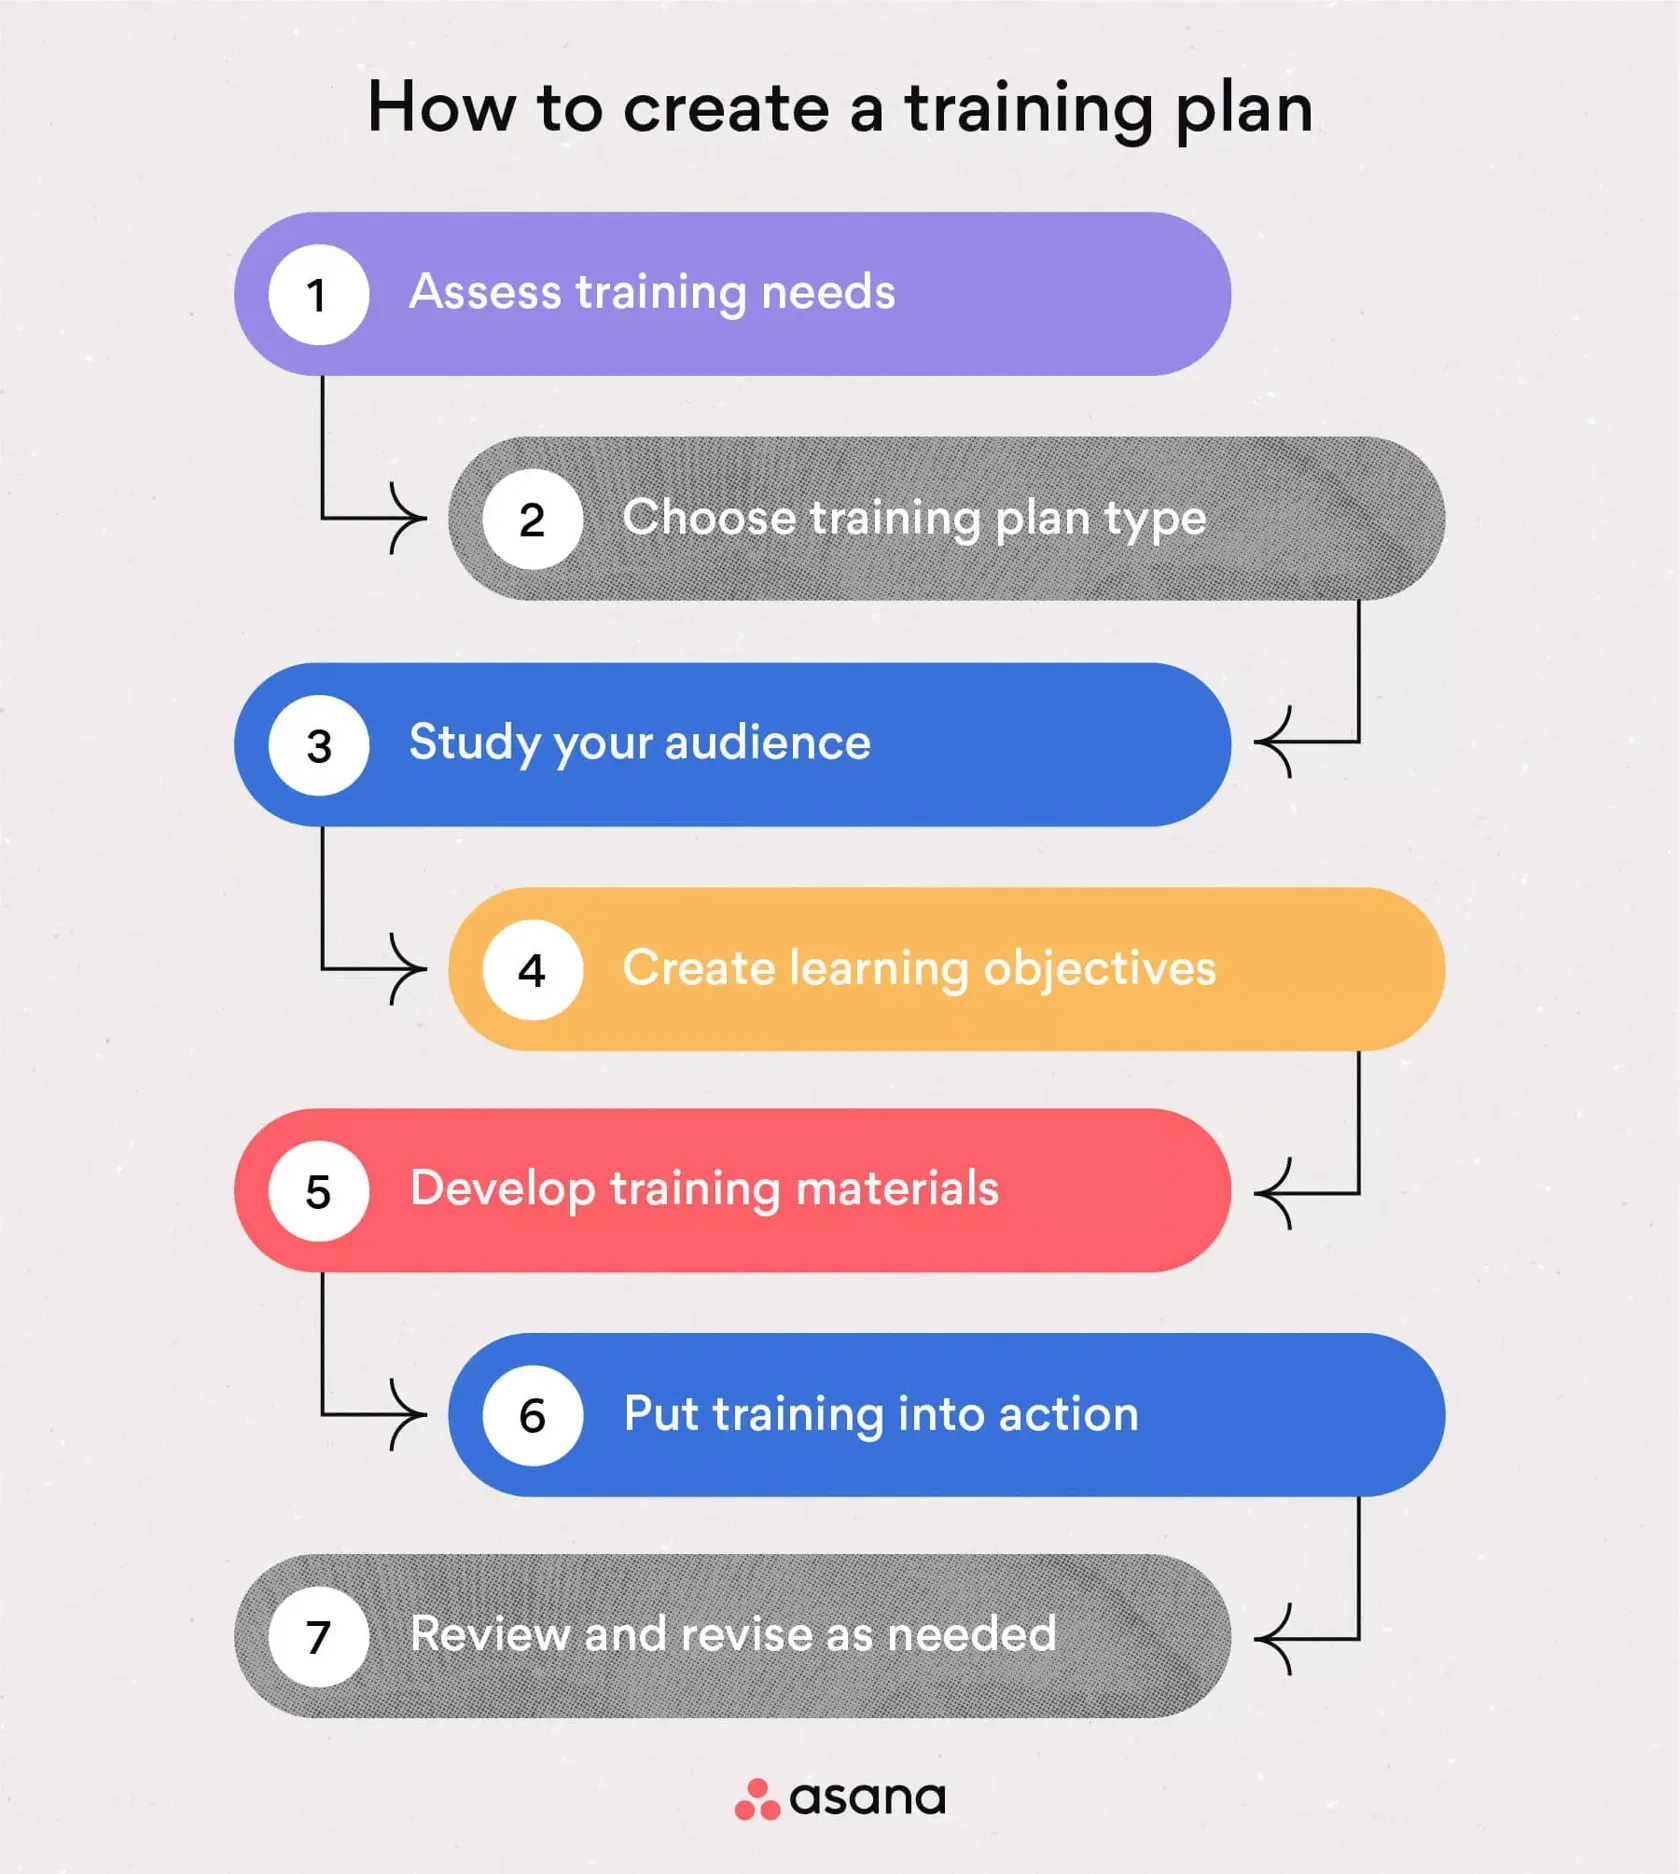 [inline illustration] How to create a training plan (infographic)